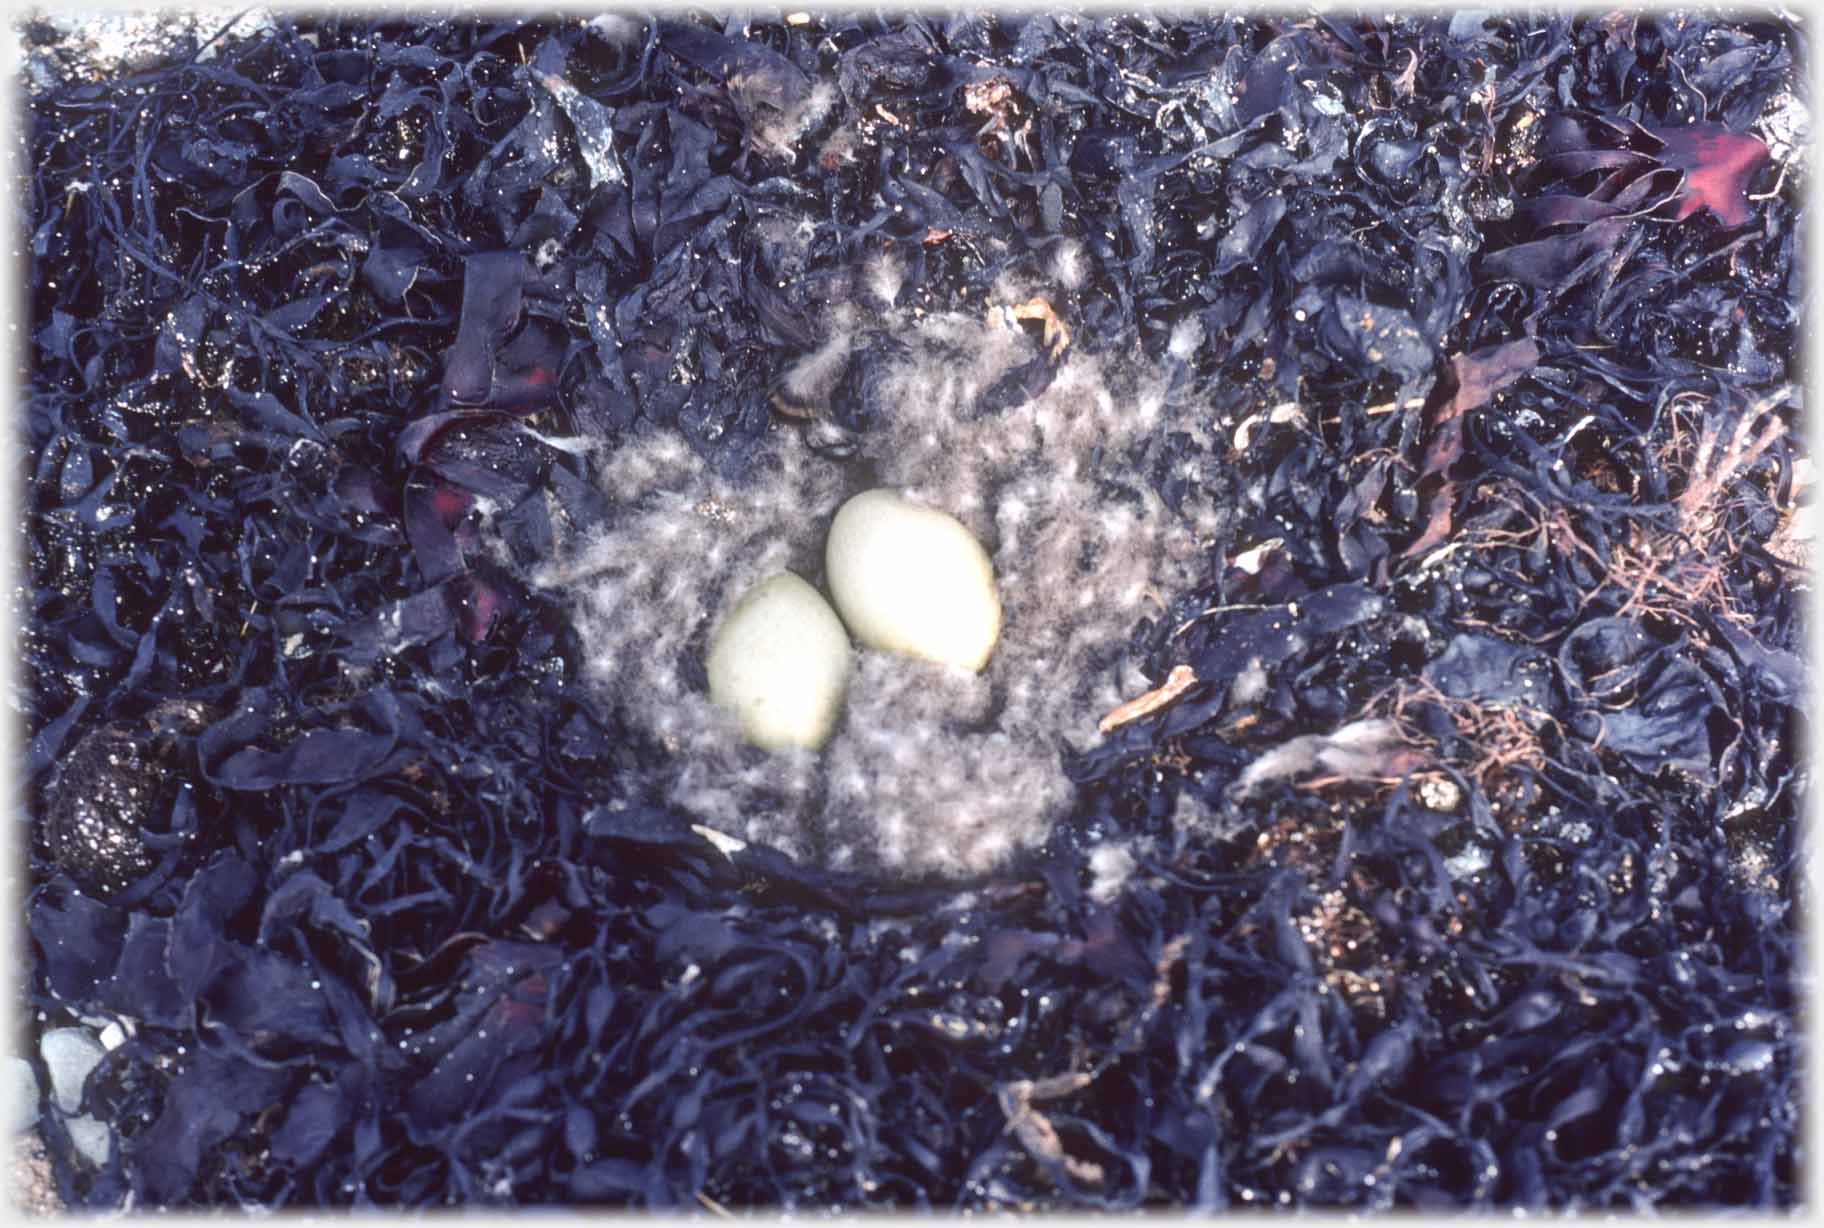 Two white eggs with nested in down and seaweed.